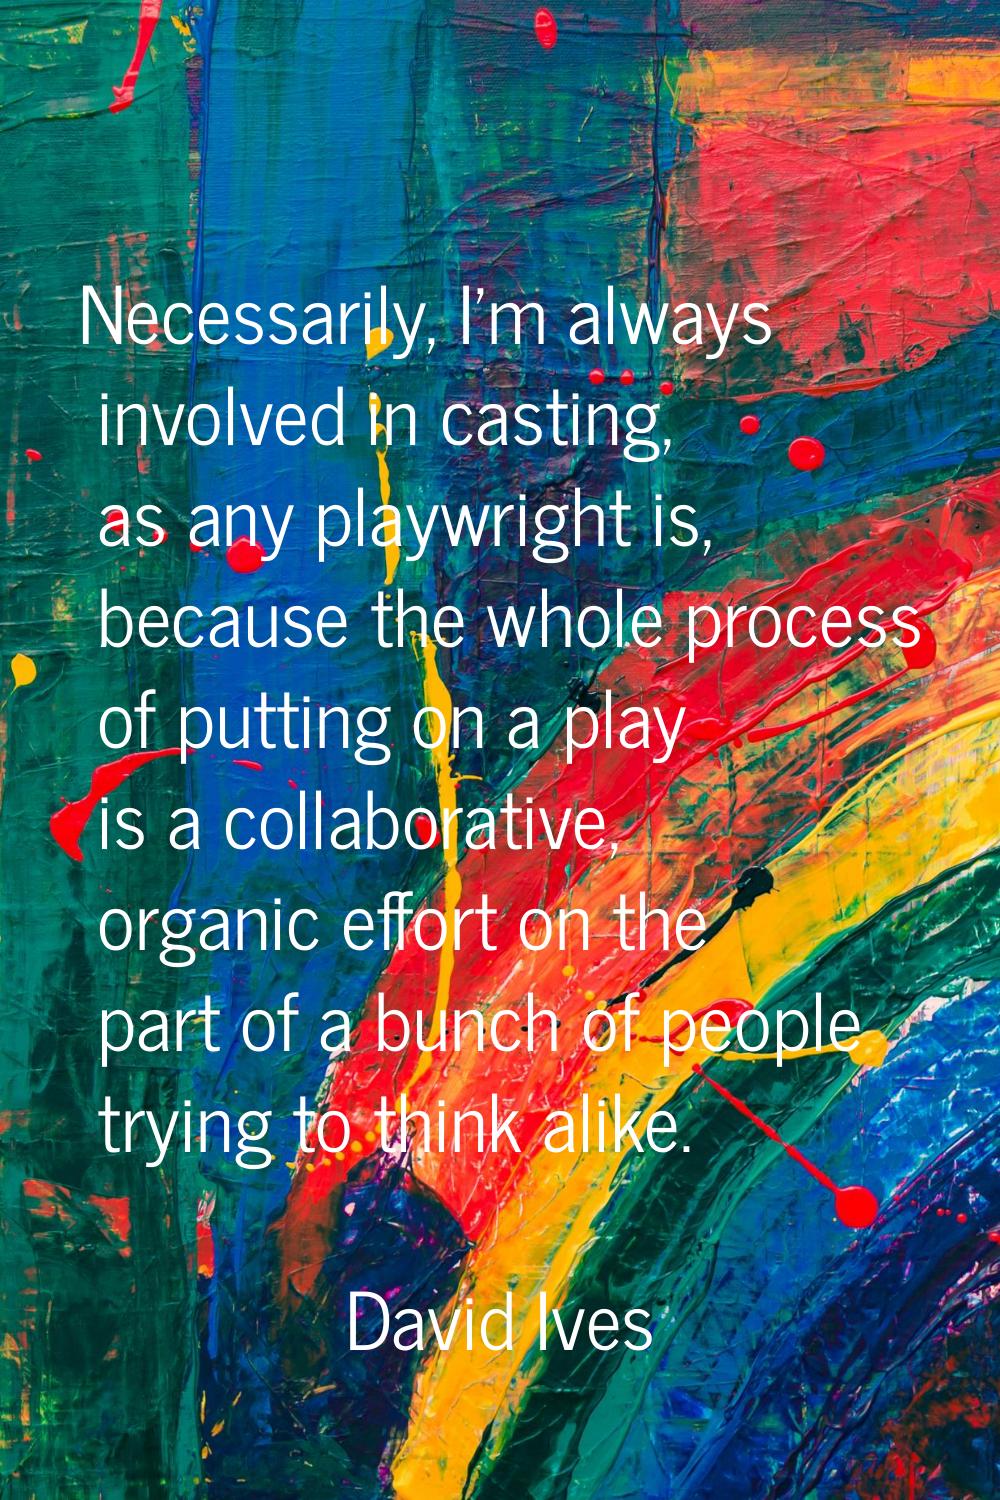 Necessarily, I'm always involved in casting, as any playwright is, because the whole process of put